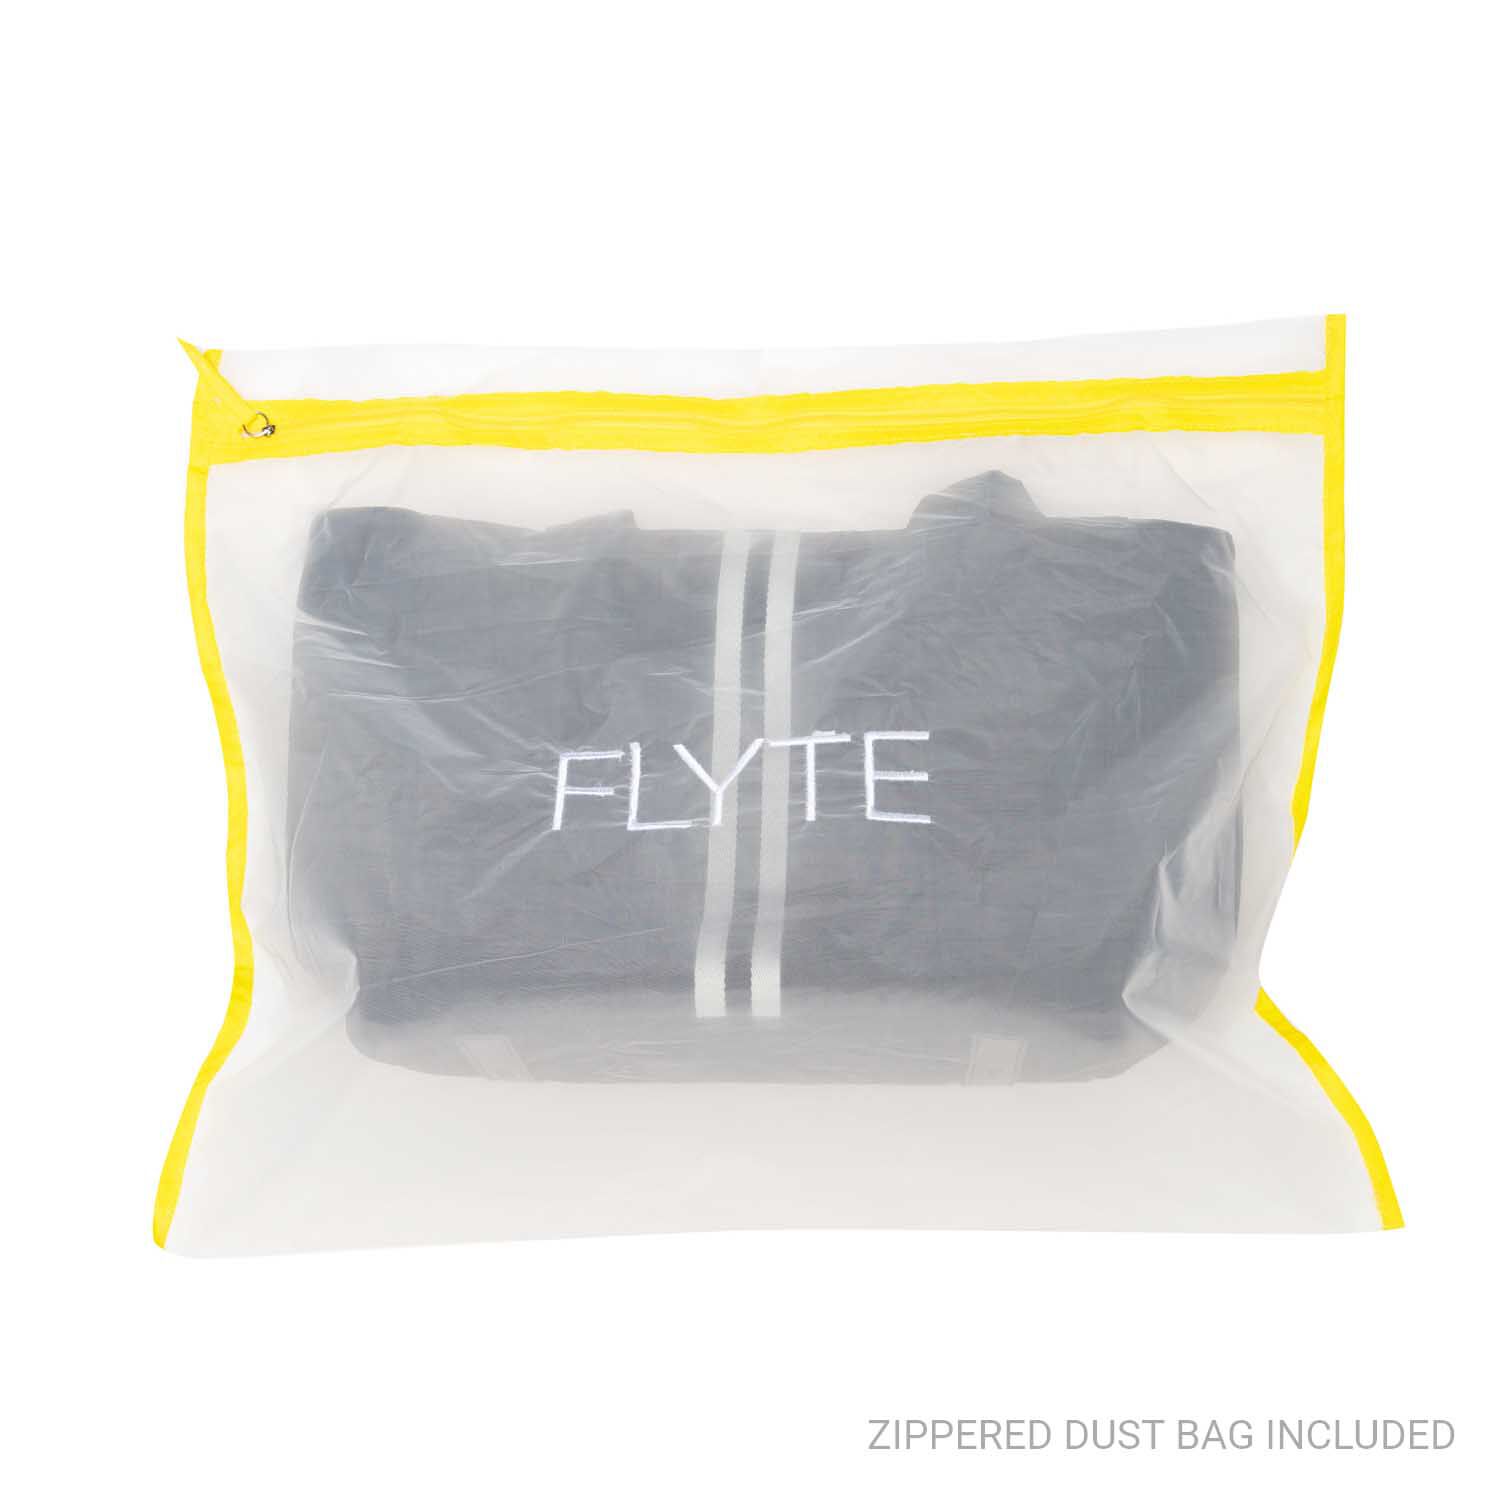 FLYTE Bags | Designed for Your Active Lifestyle - YouTube